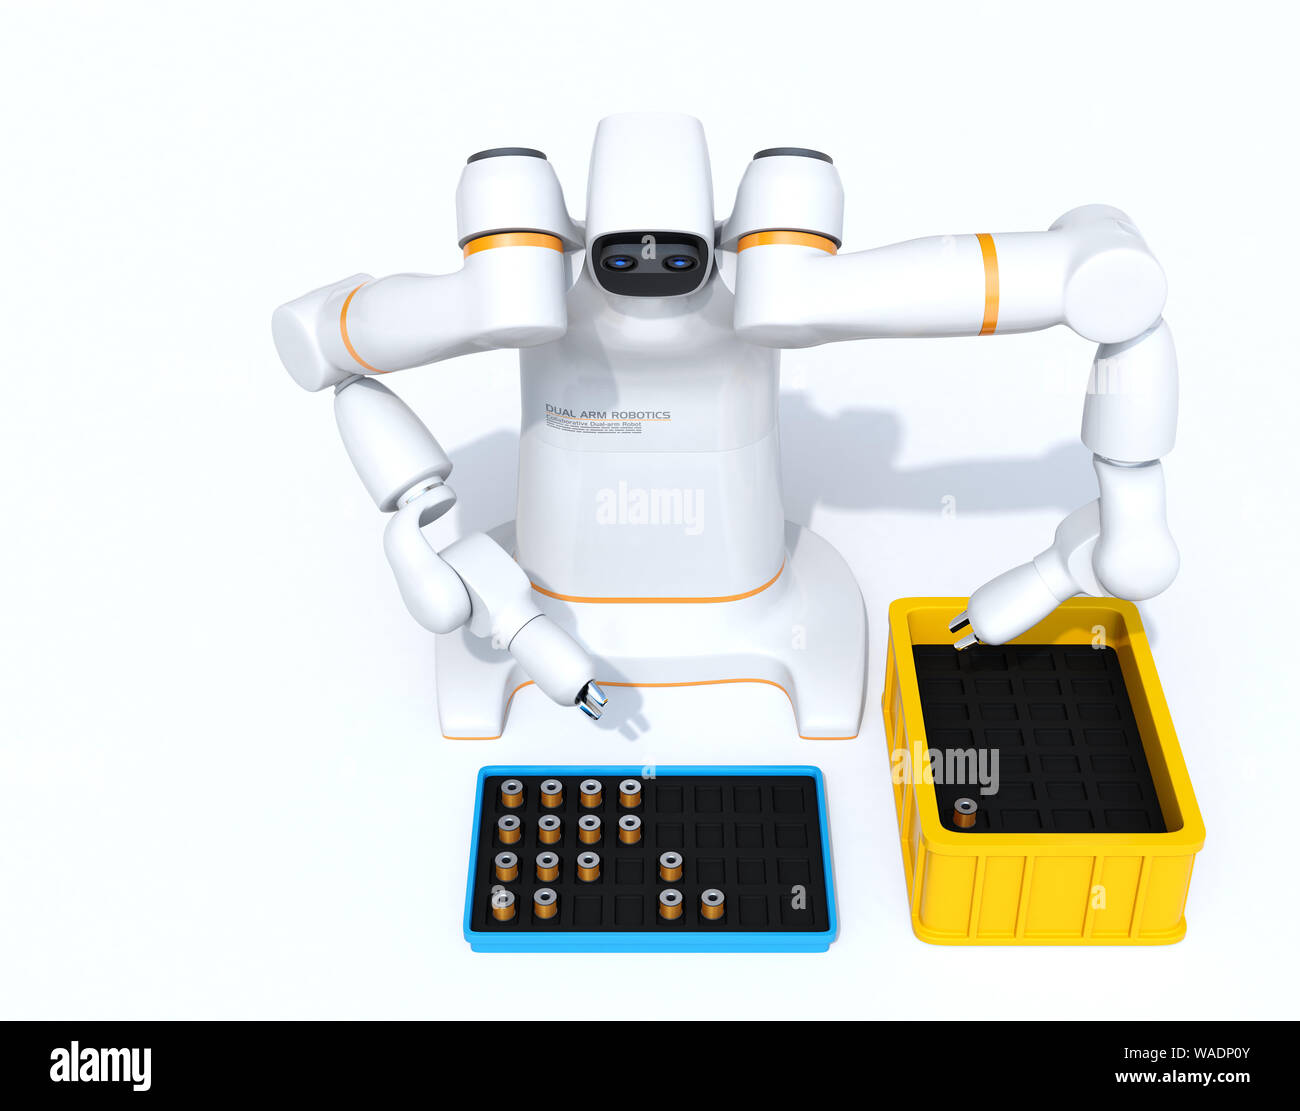 White dual-arm robot on white background. Collaborative robot concept. 3D rendering image. Stock Photo